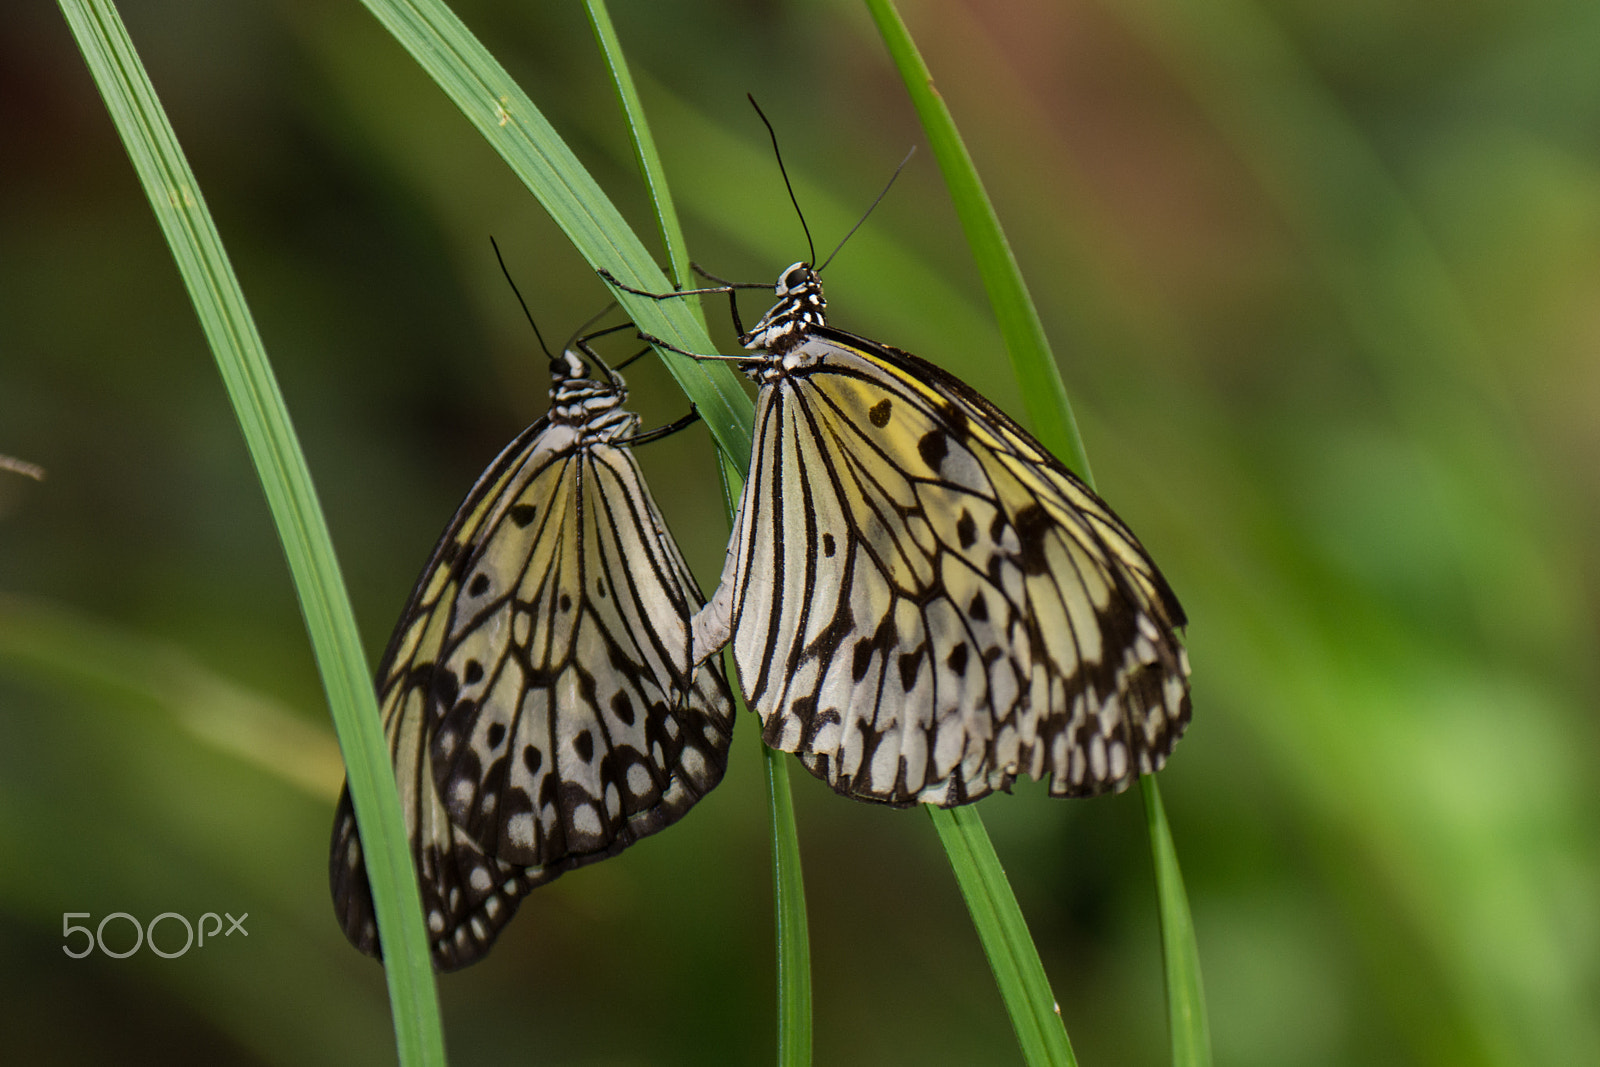 Nikon D7100 sample photo. White tree nymph butterfly pairing photography